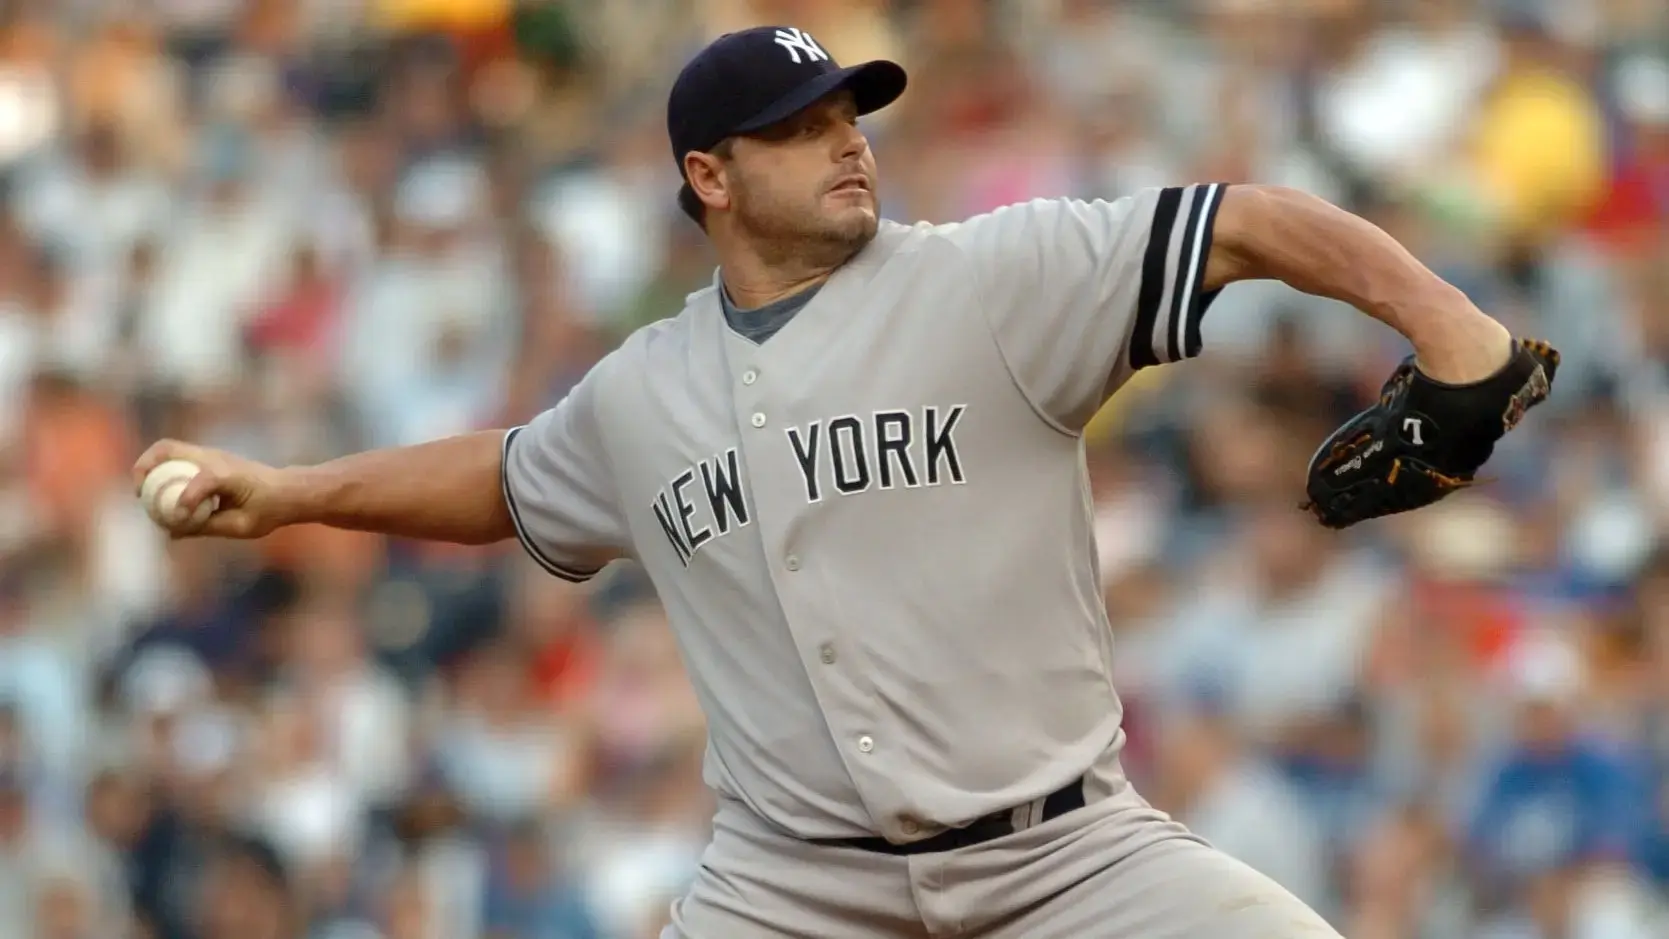 New York Yankees starting pitcher (22) Roger Clemens delivers a pitch in the first inning against the Kansas City Royals at Kauffman Stadium in Kansas City, MO. / John Rieger - USA TODAY Sports